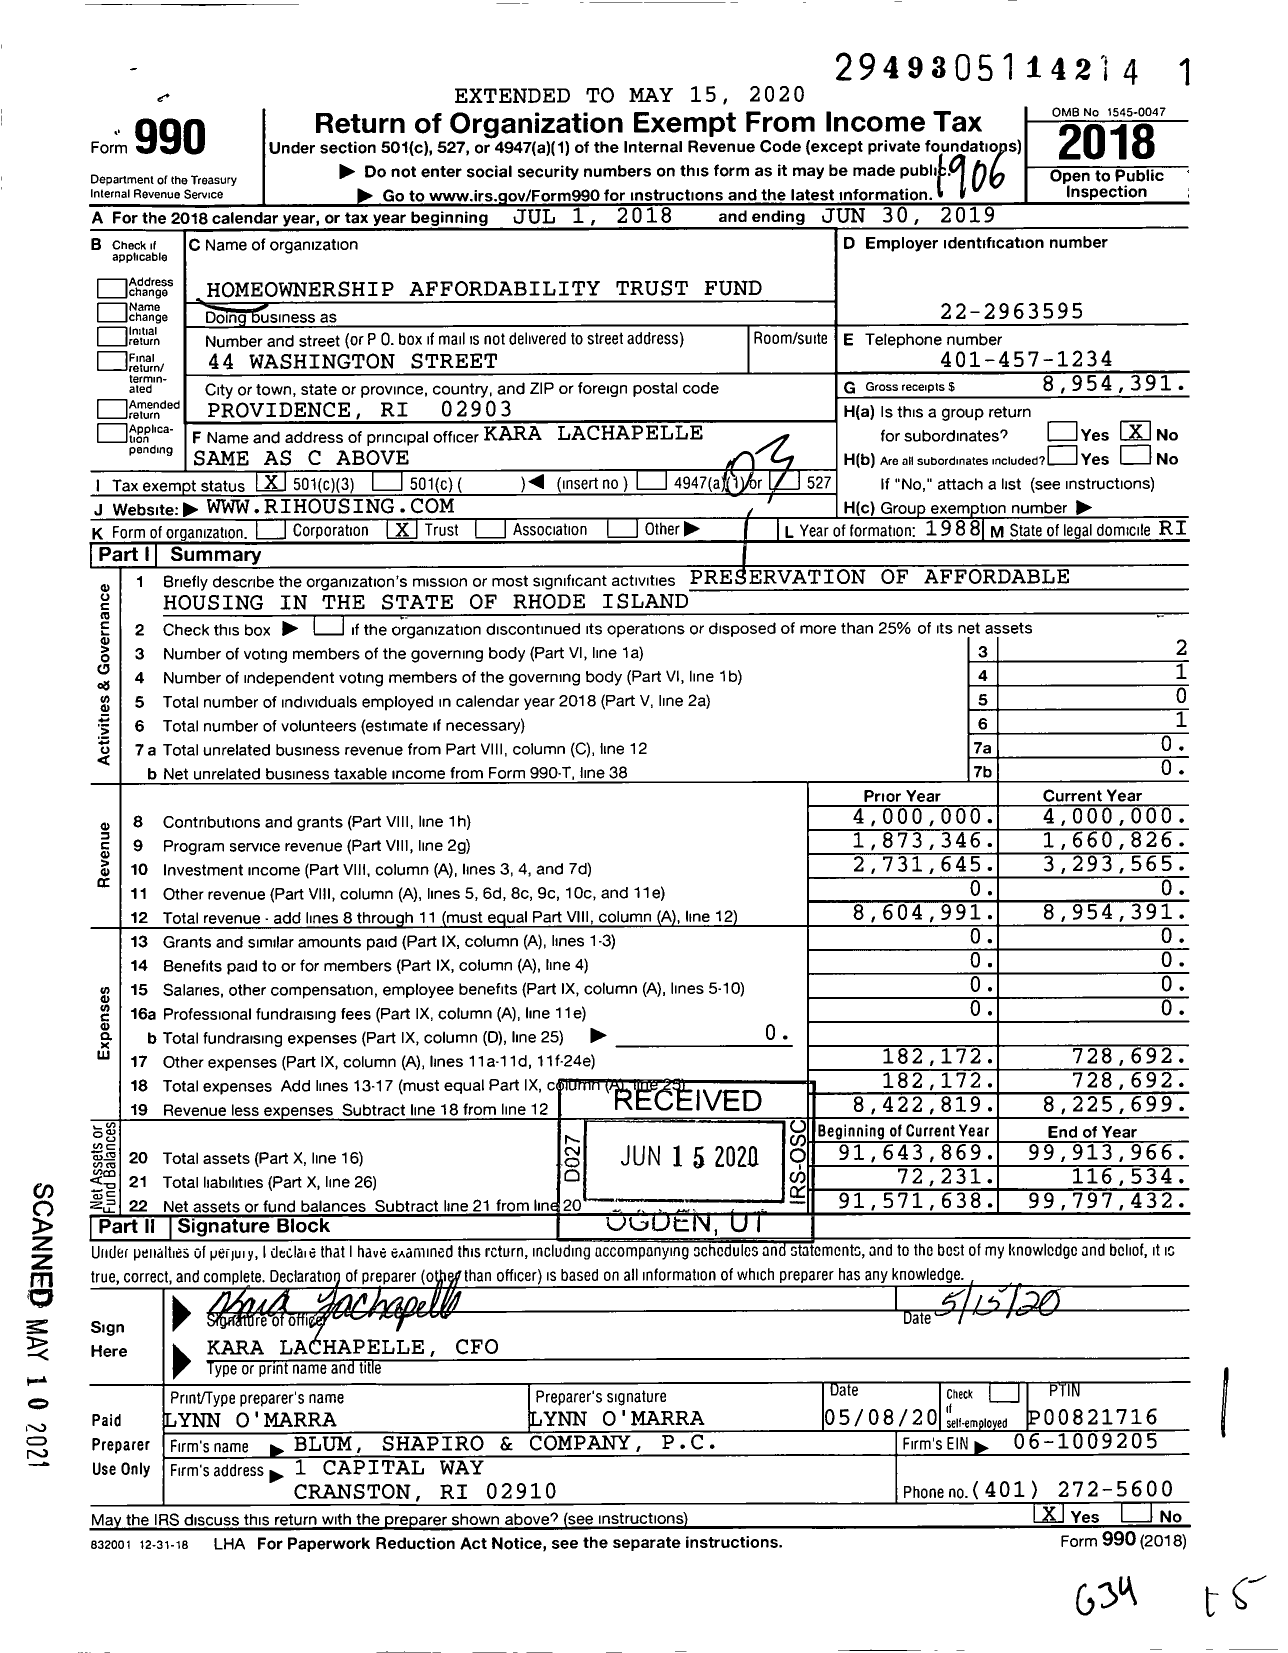 Image of first page of 2018 Form 990 for Homeownership Affordability Trust Fund